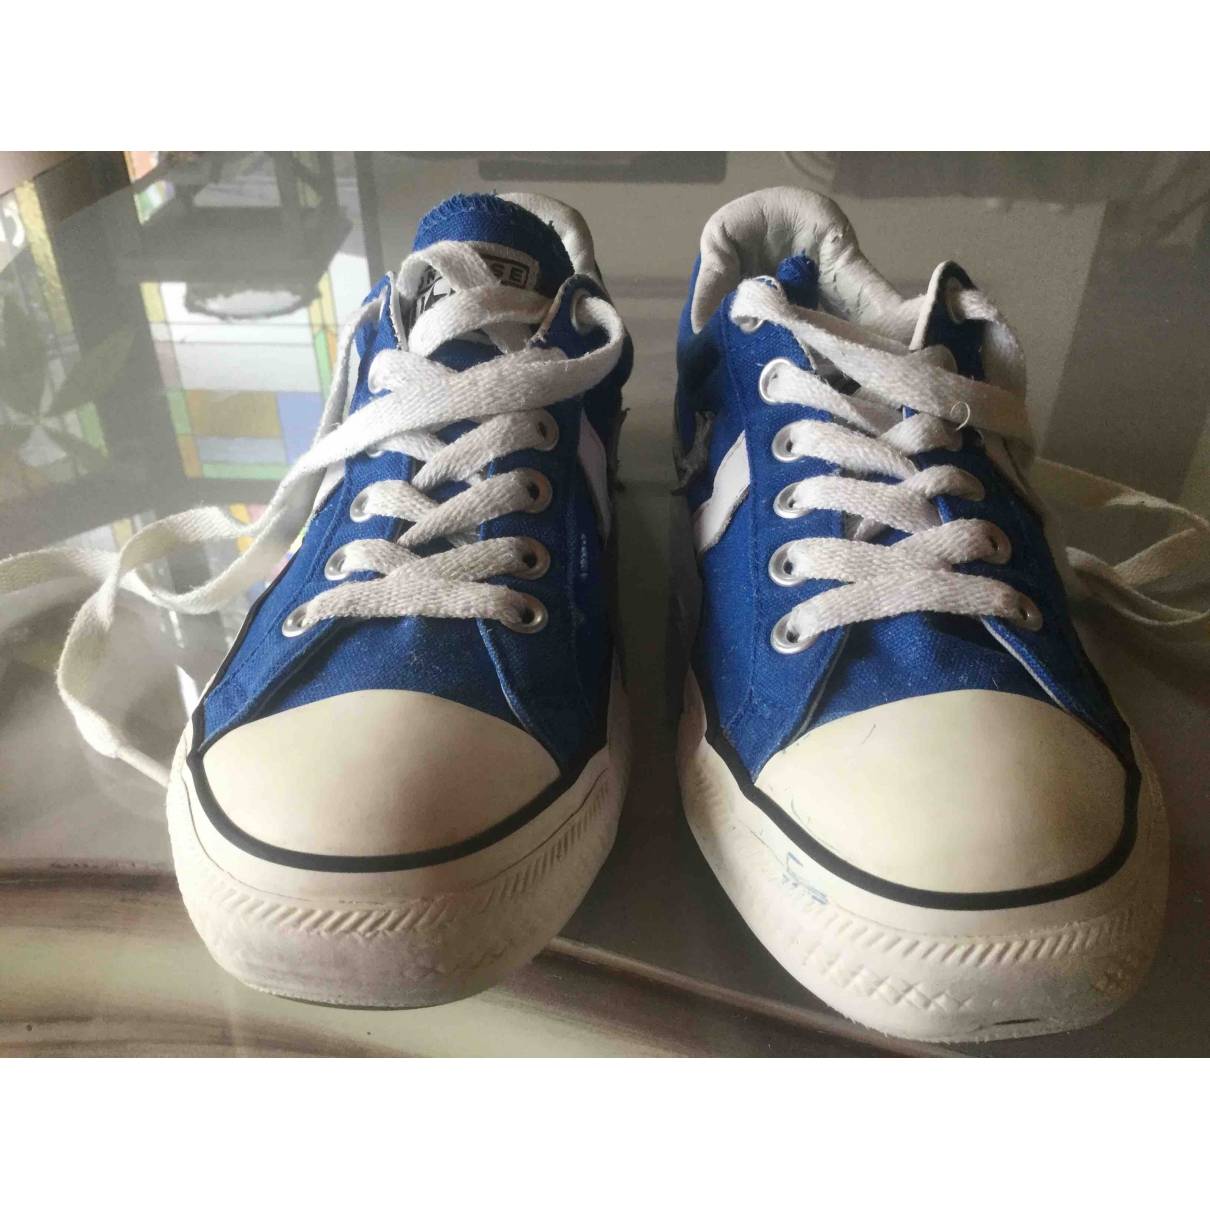 Converse Cloth low trainers for sale